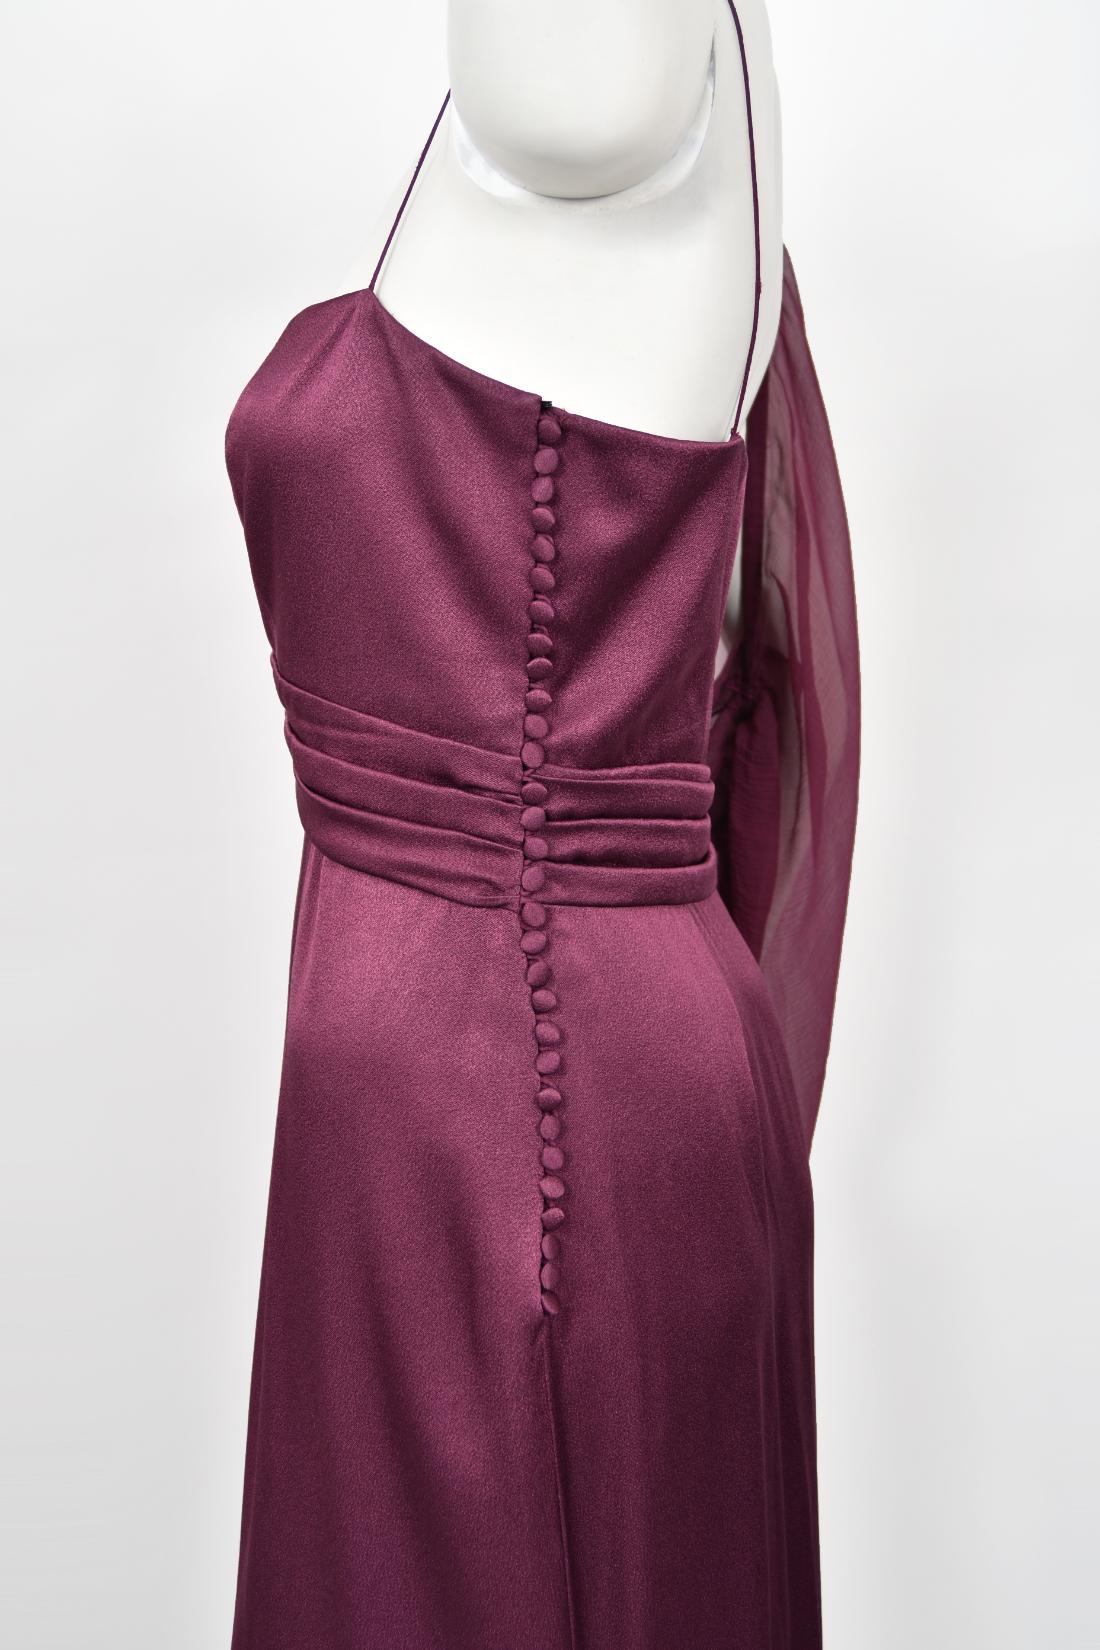 2000 Christian Dior by Galliano Purple Silk Sheer-Sleeve Asymmetric Draped Gown For Sale 3